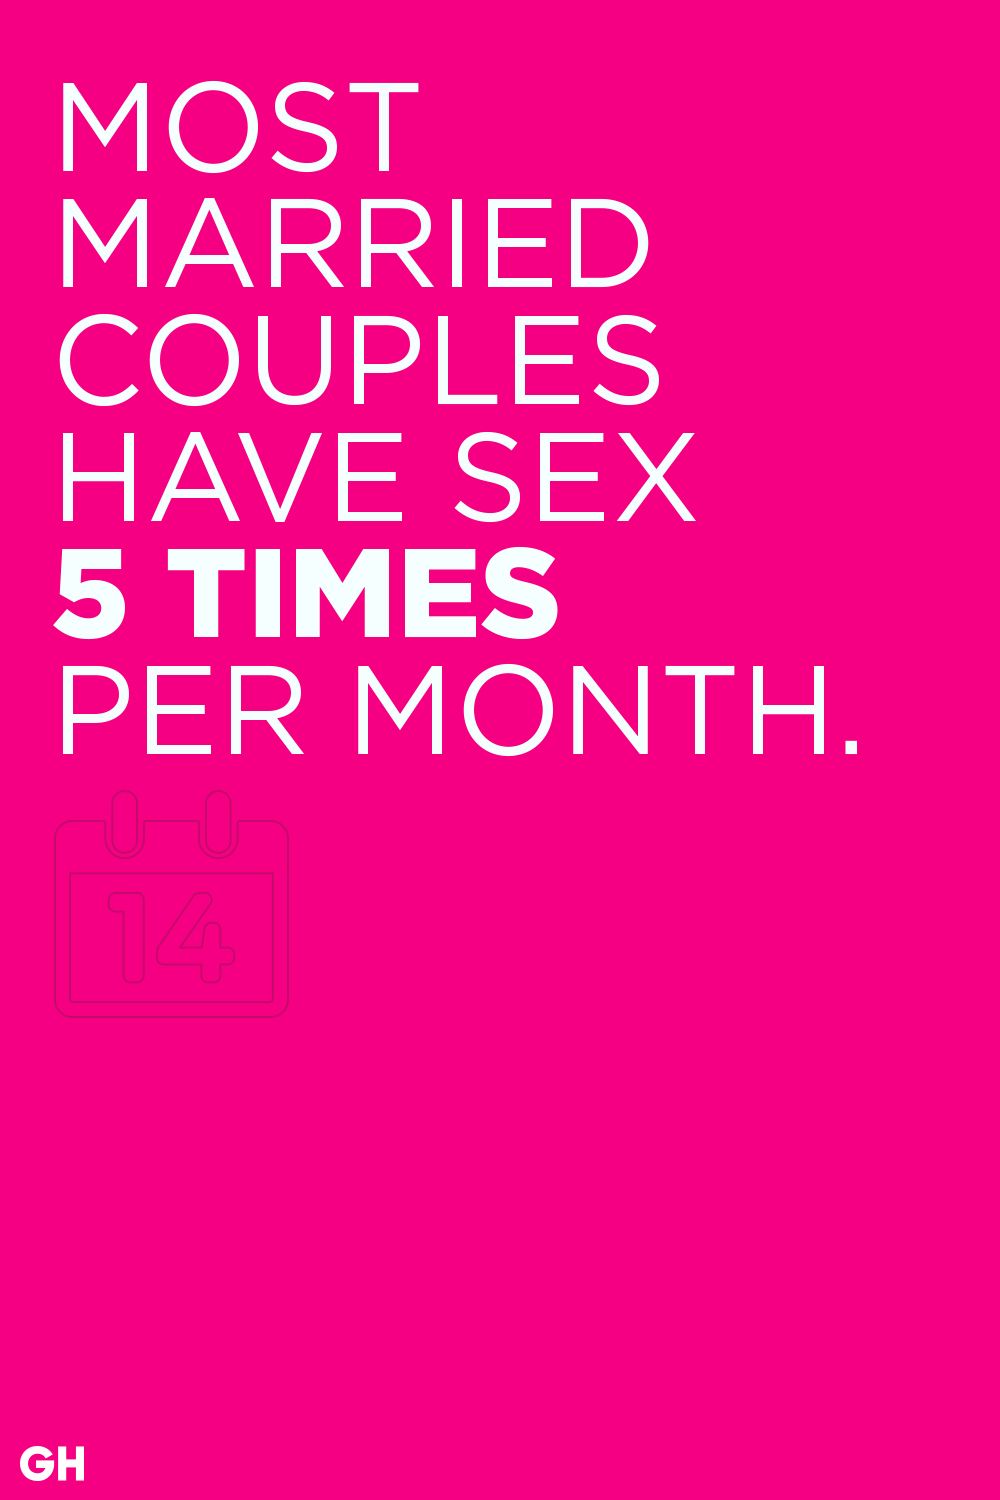 10 Surprising Statistics About Married image